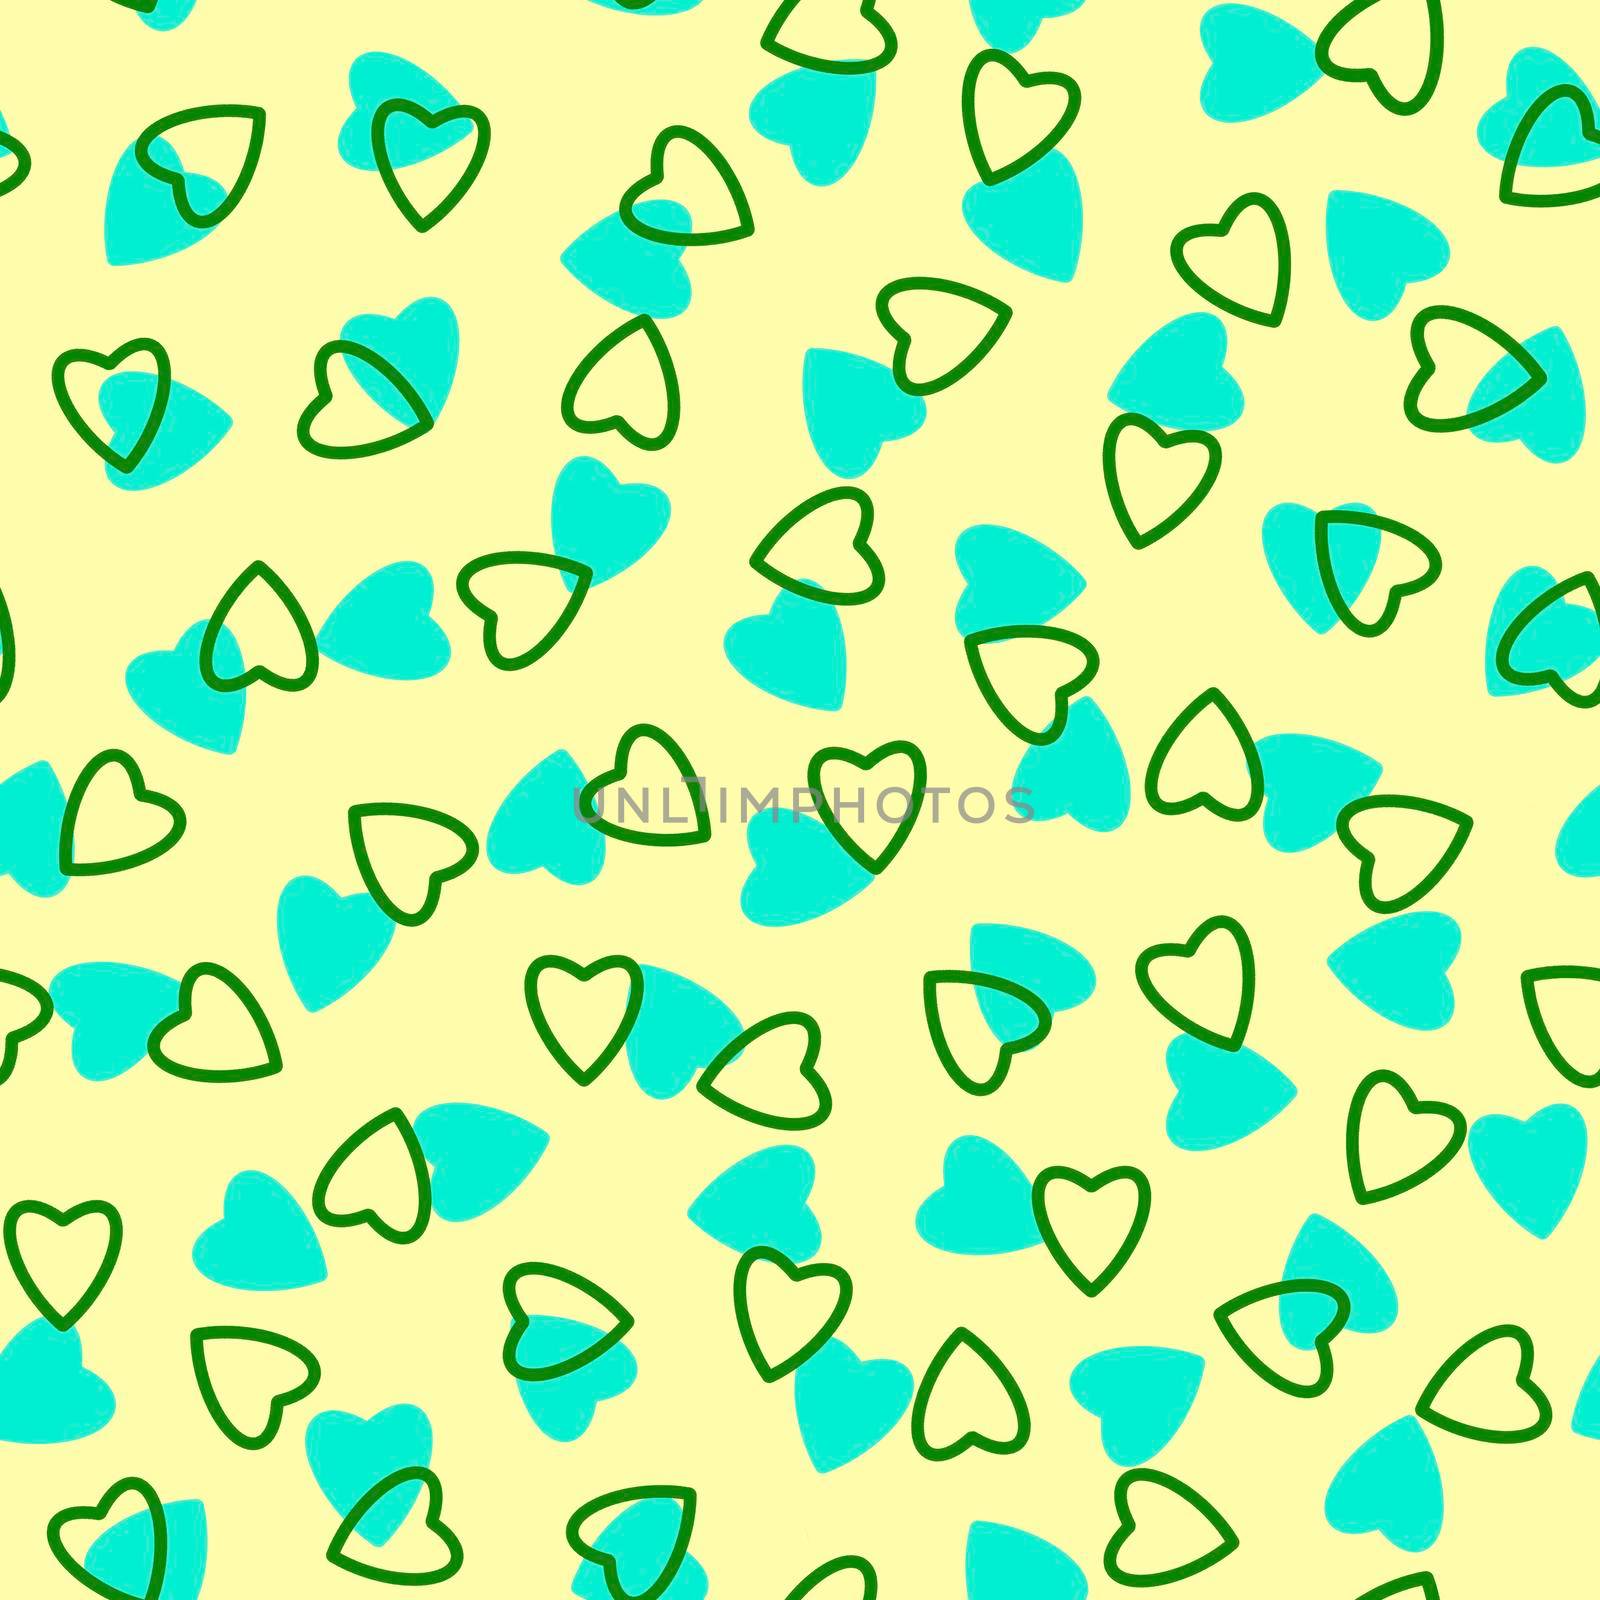 Simple heart seamless pattern,endless chaotic texture made of tiny heart silhouettes.Valentines,mothers day background.Azure,green,Ivory.Great for Easter,wedding,scrapbook,gift wrapping paper,textiles